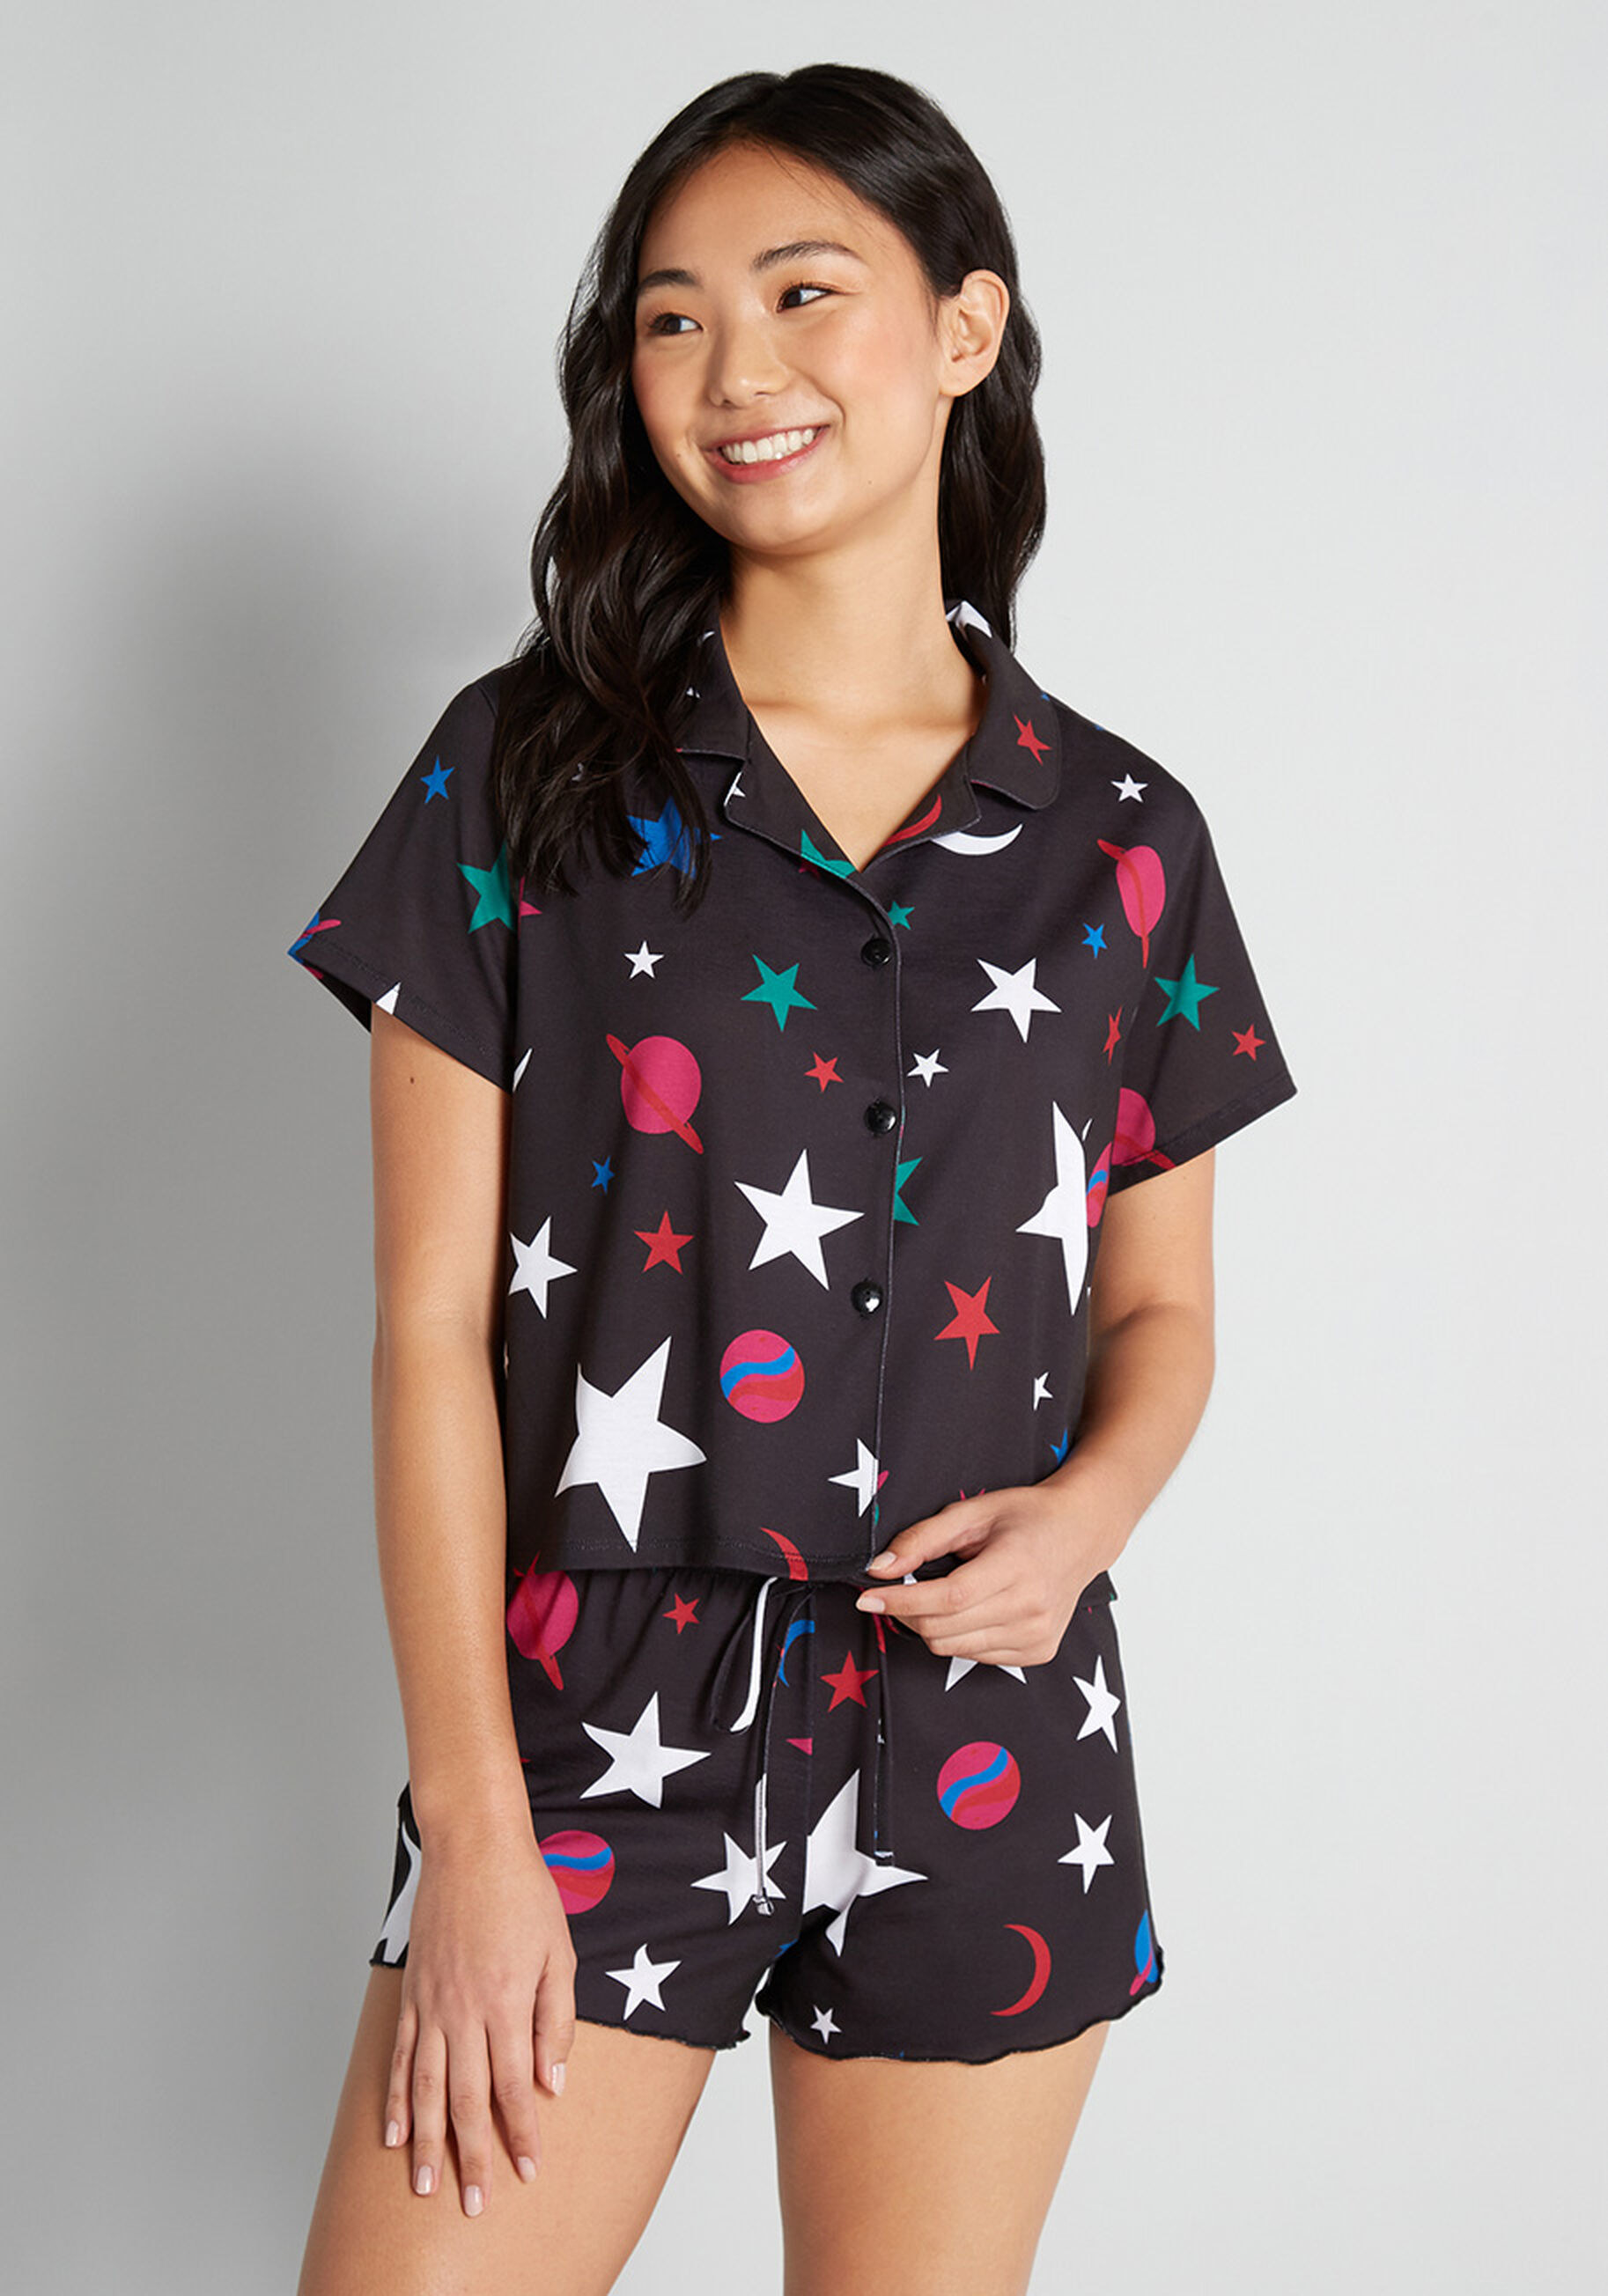 a model wearing a black pajama set with white stars and red and blue planets on it